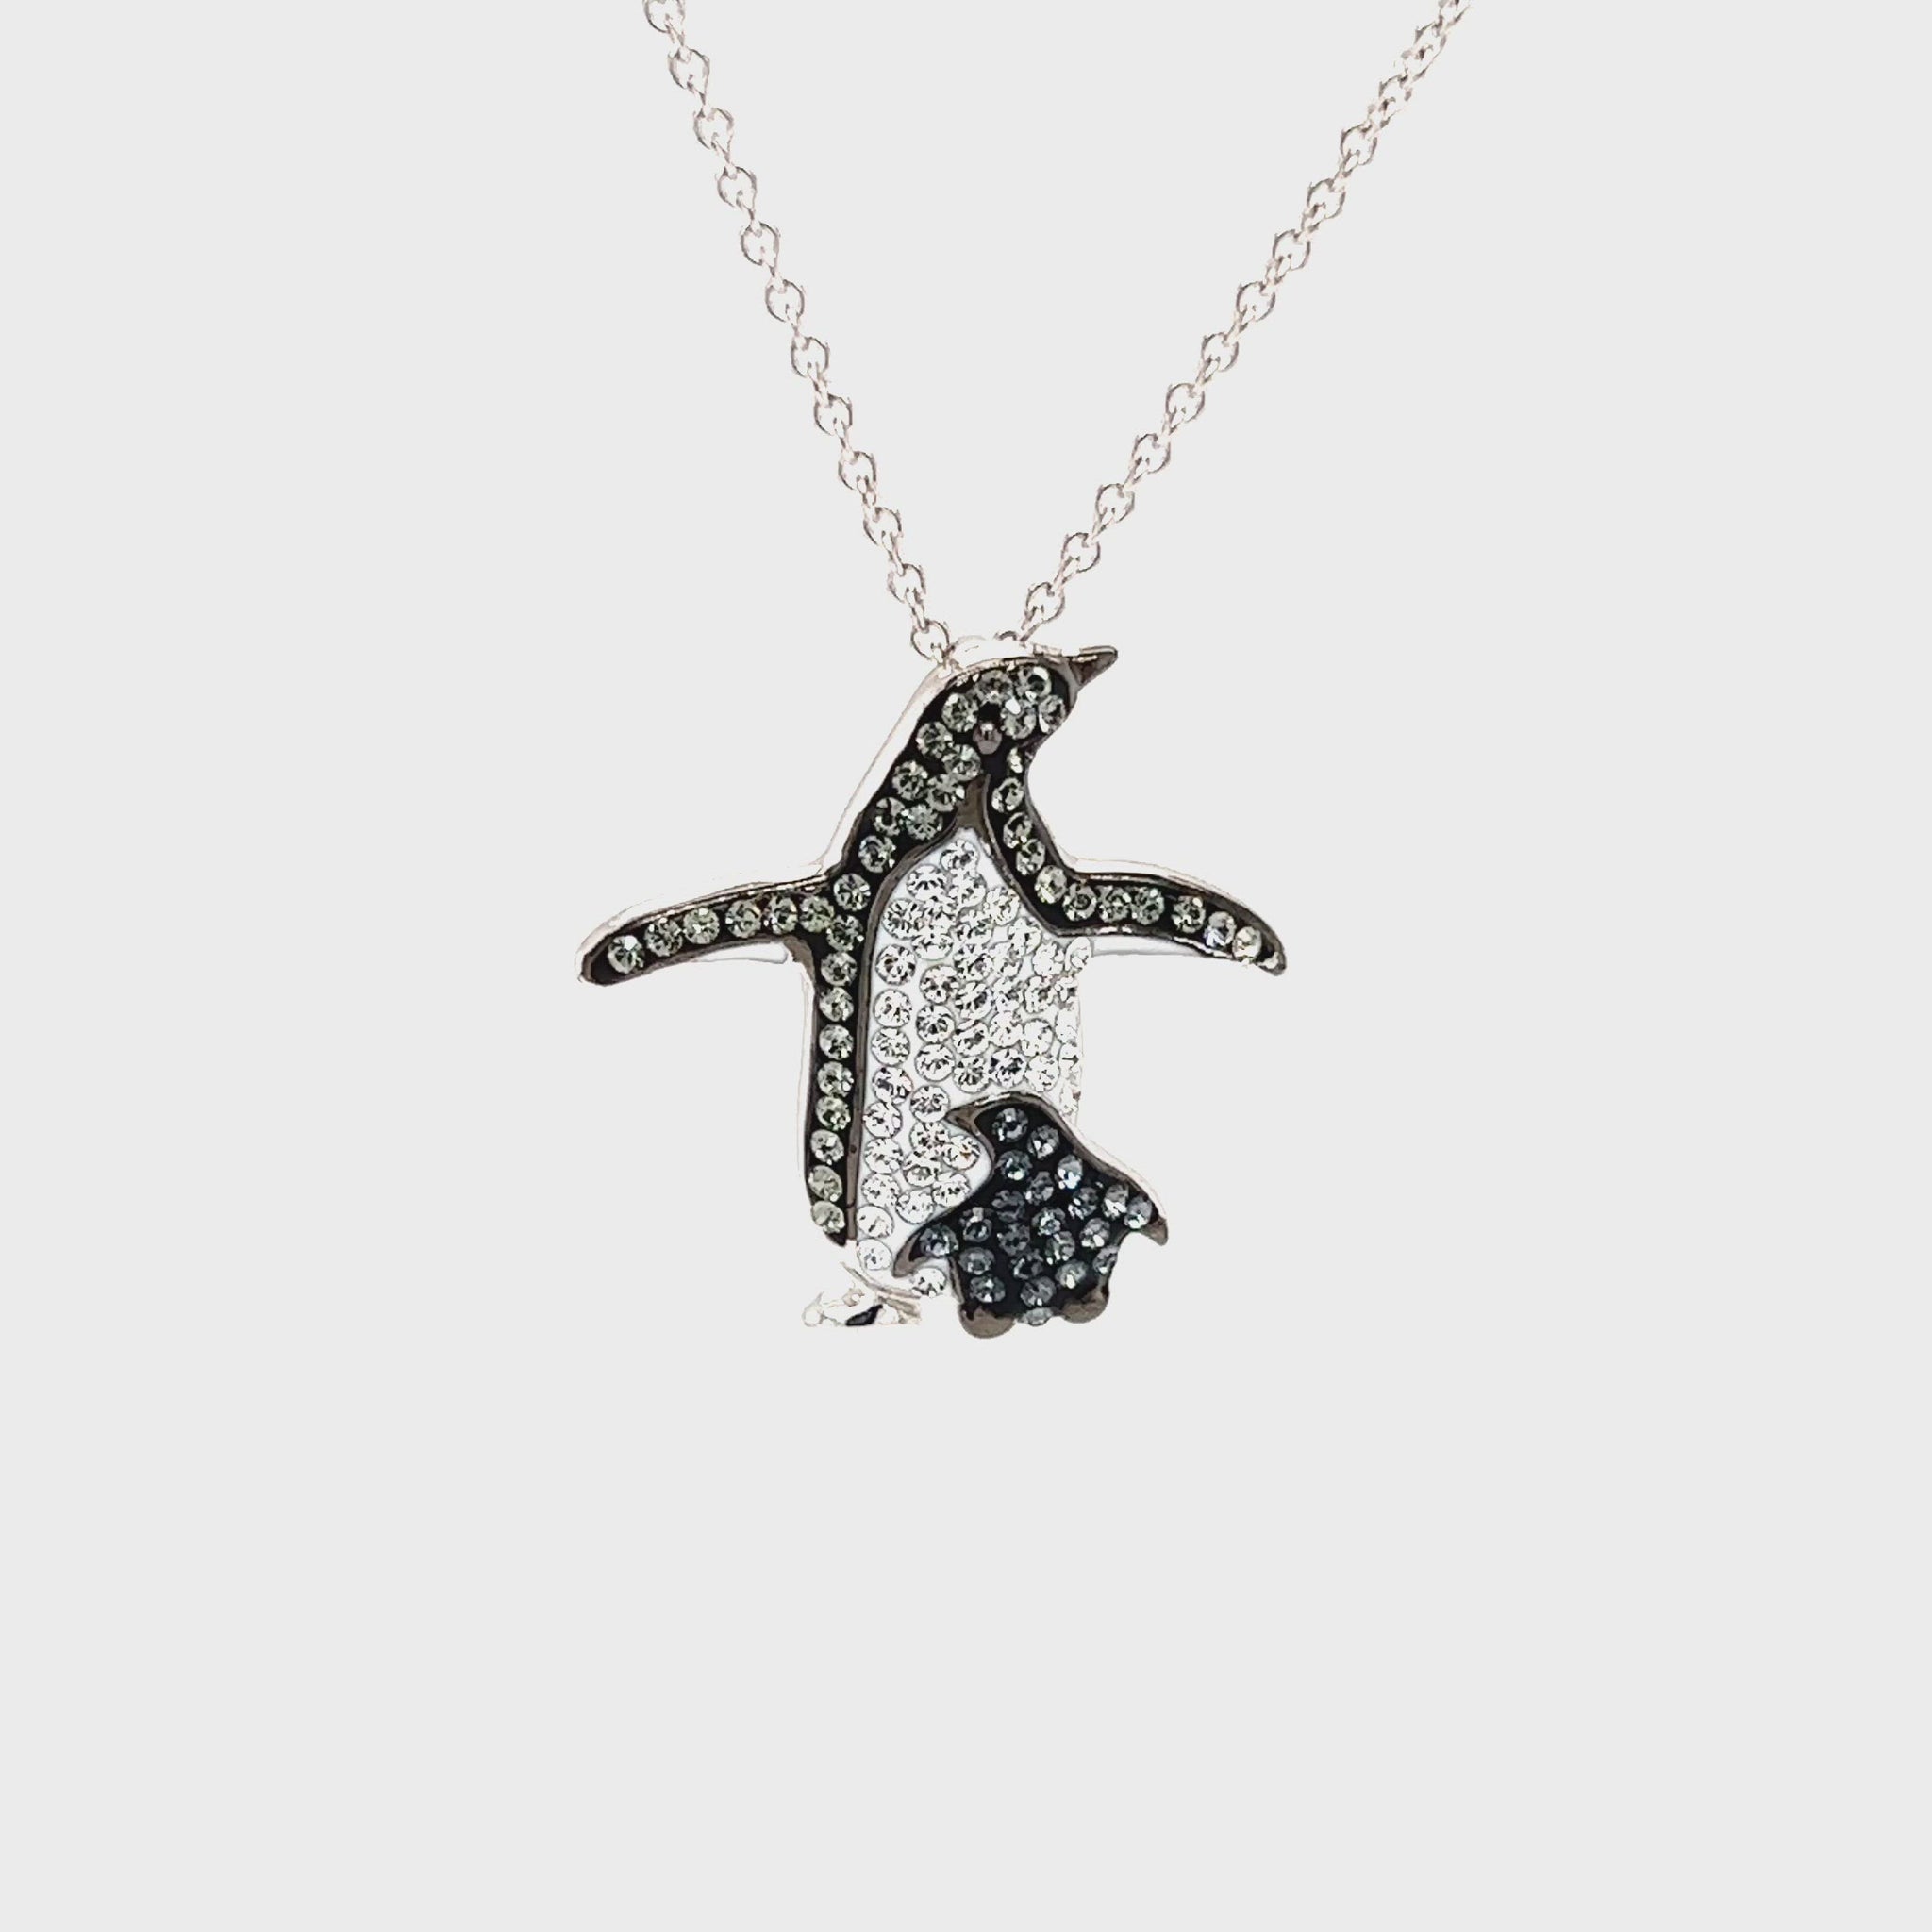 Penguin and Baby Necklace with Crystals in Sterling Silver Video